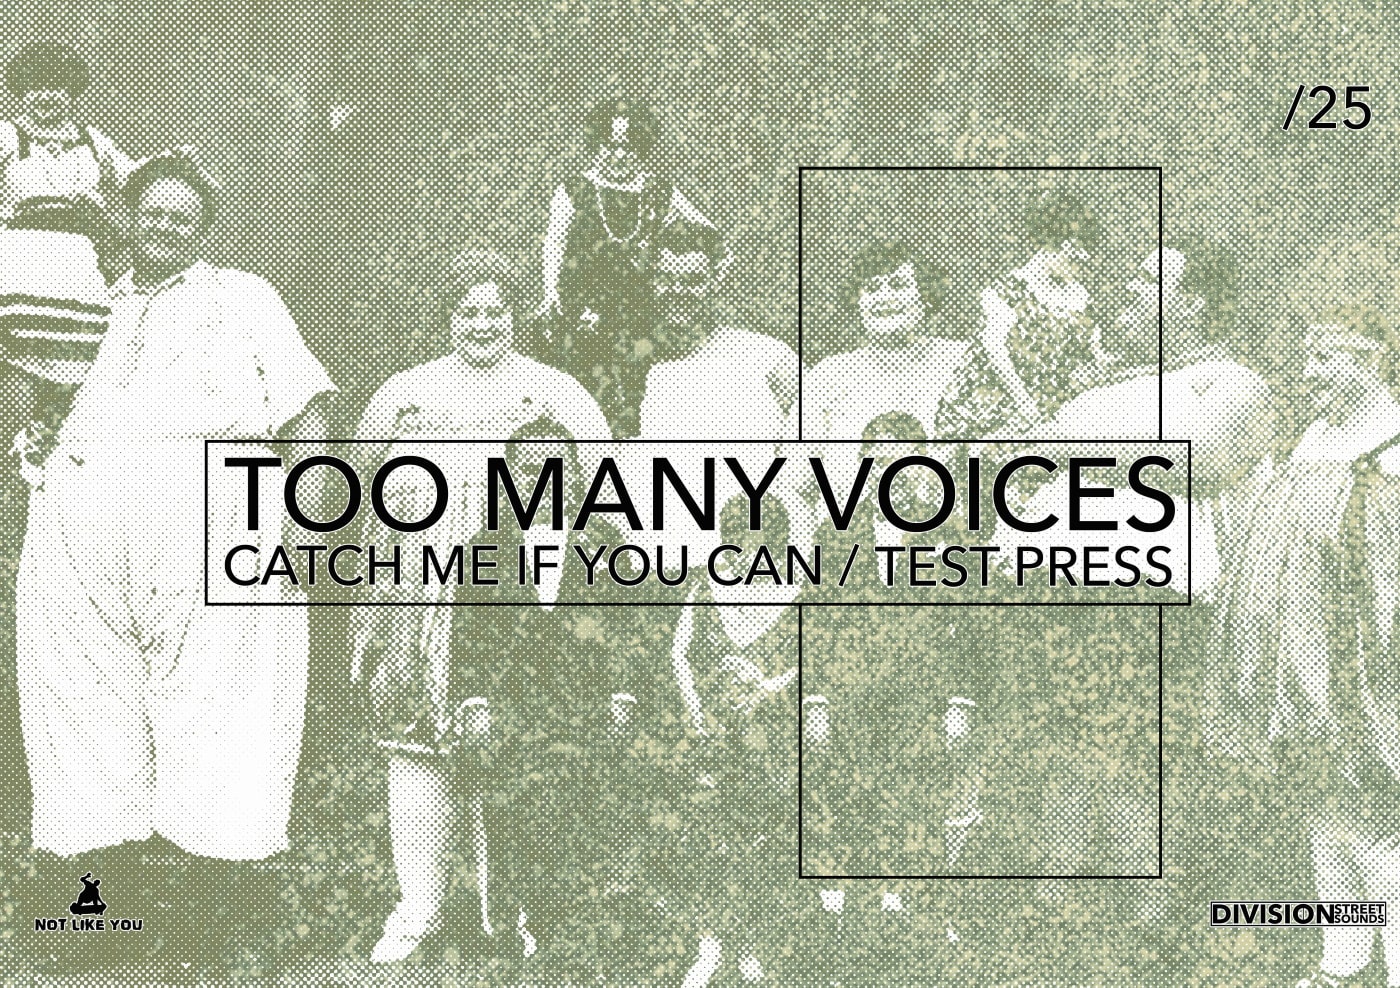 TOO MANY VOICES promo